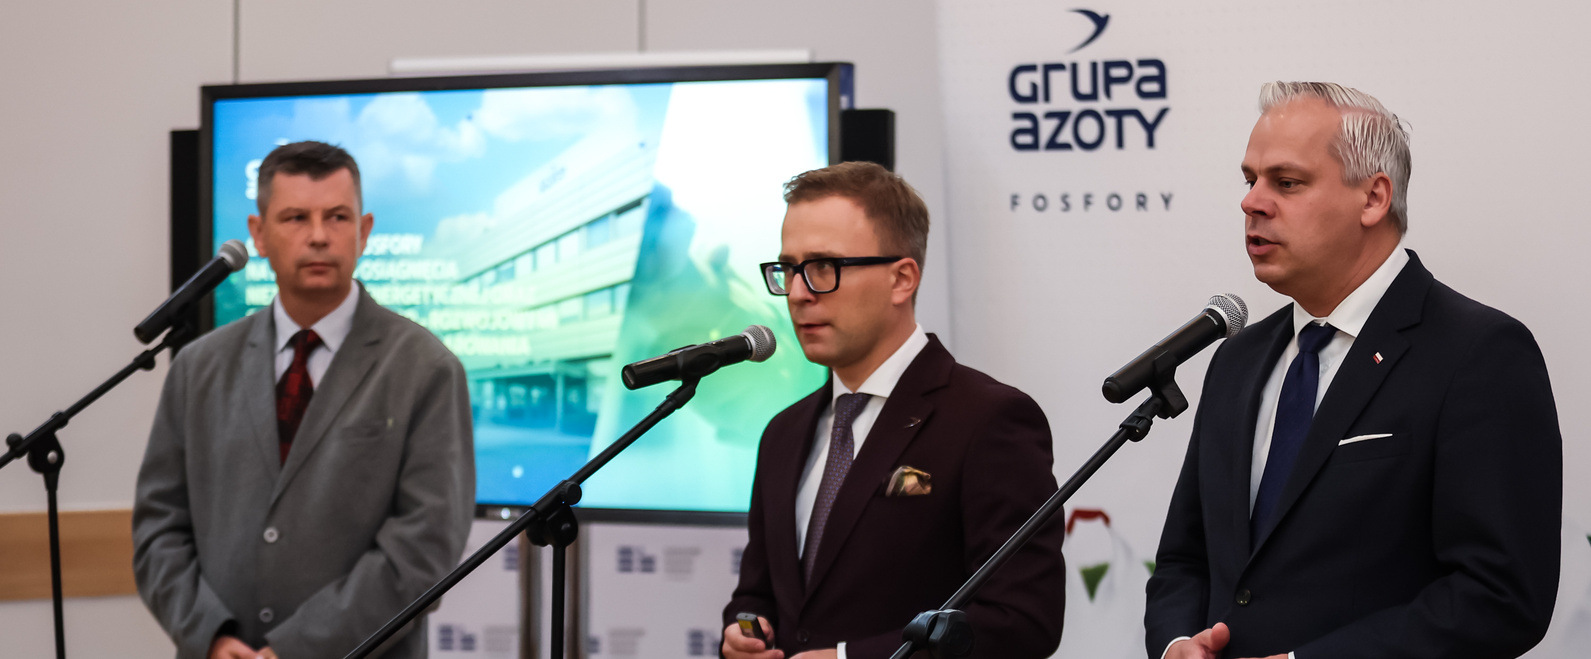 Grupa Azoty Fosfory’s commitment to energy independence and R&D plans for phosphogypsum management 